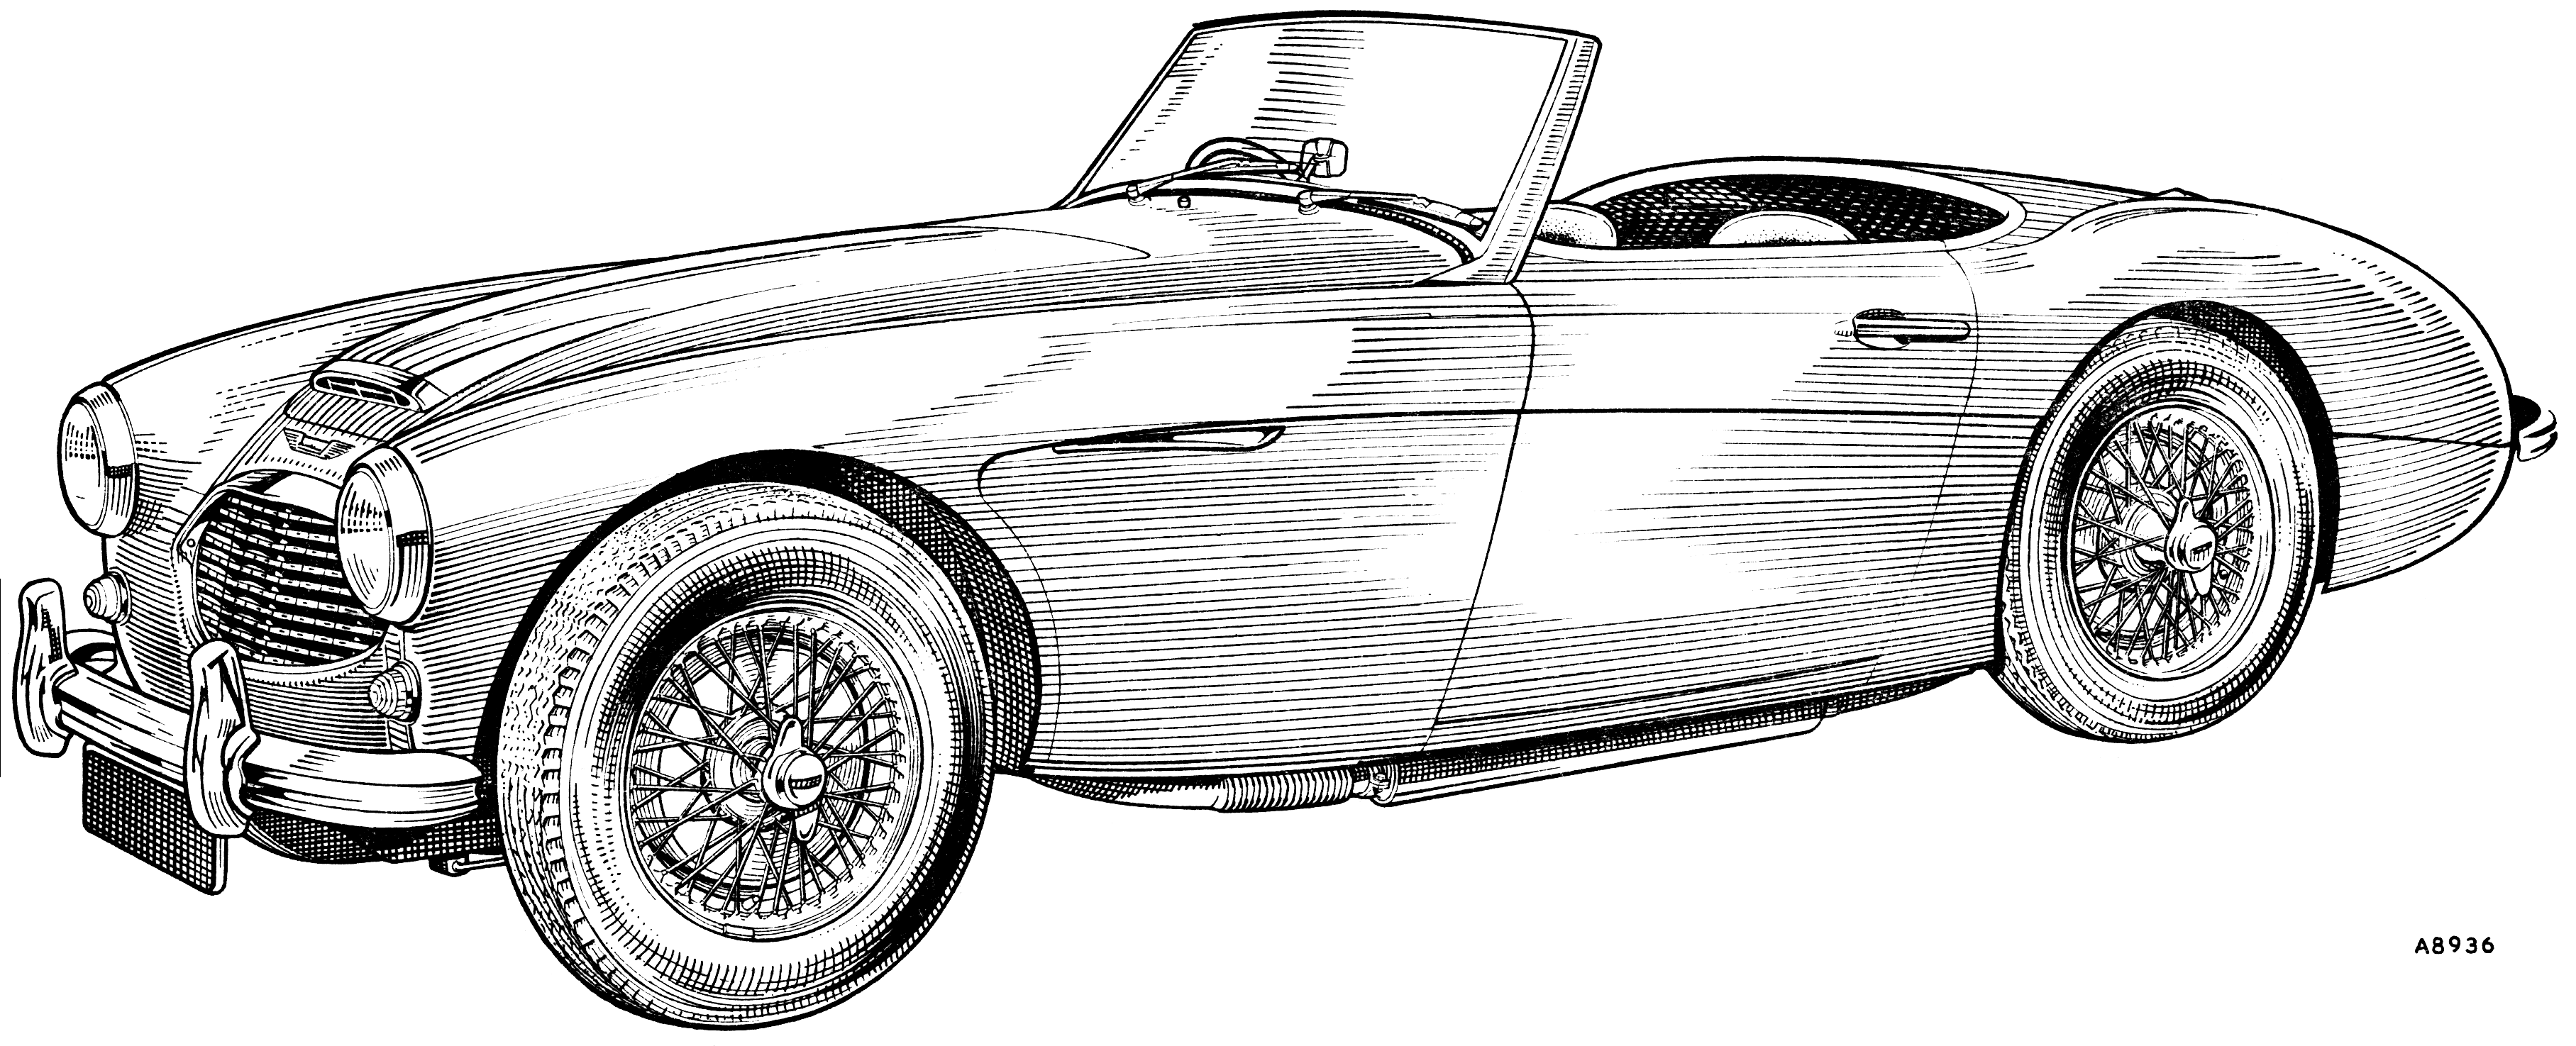 Service Parts Lists, Austin-Healey 100 Six (Series BN4 and BN6)